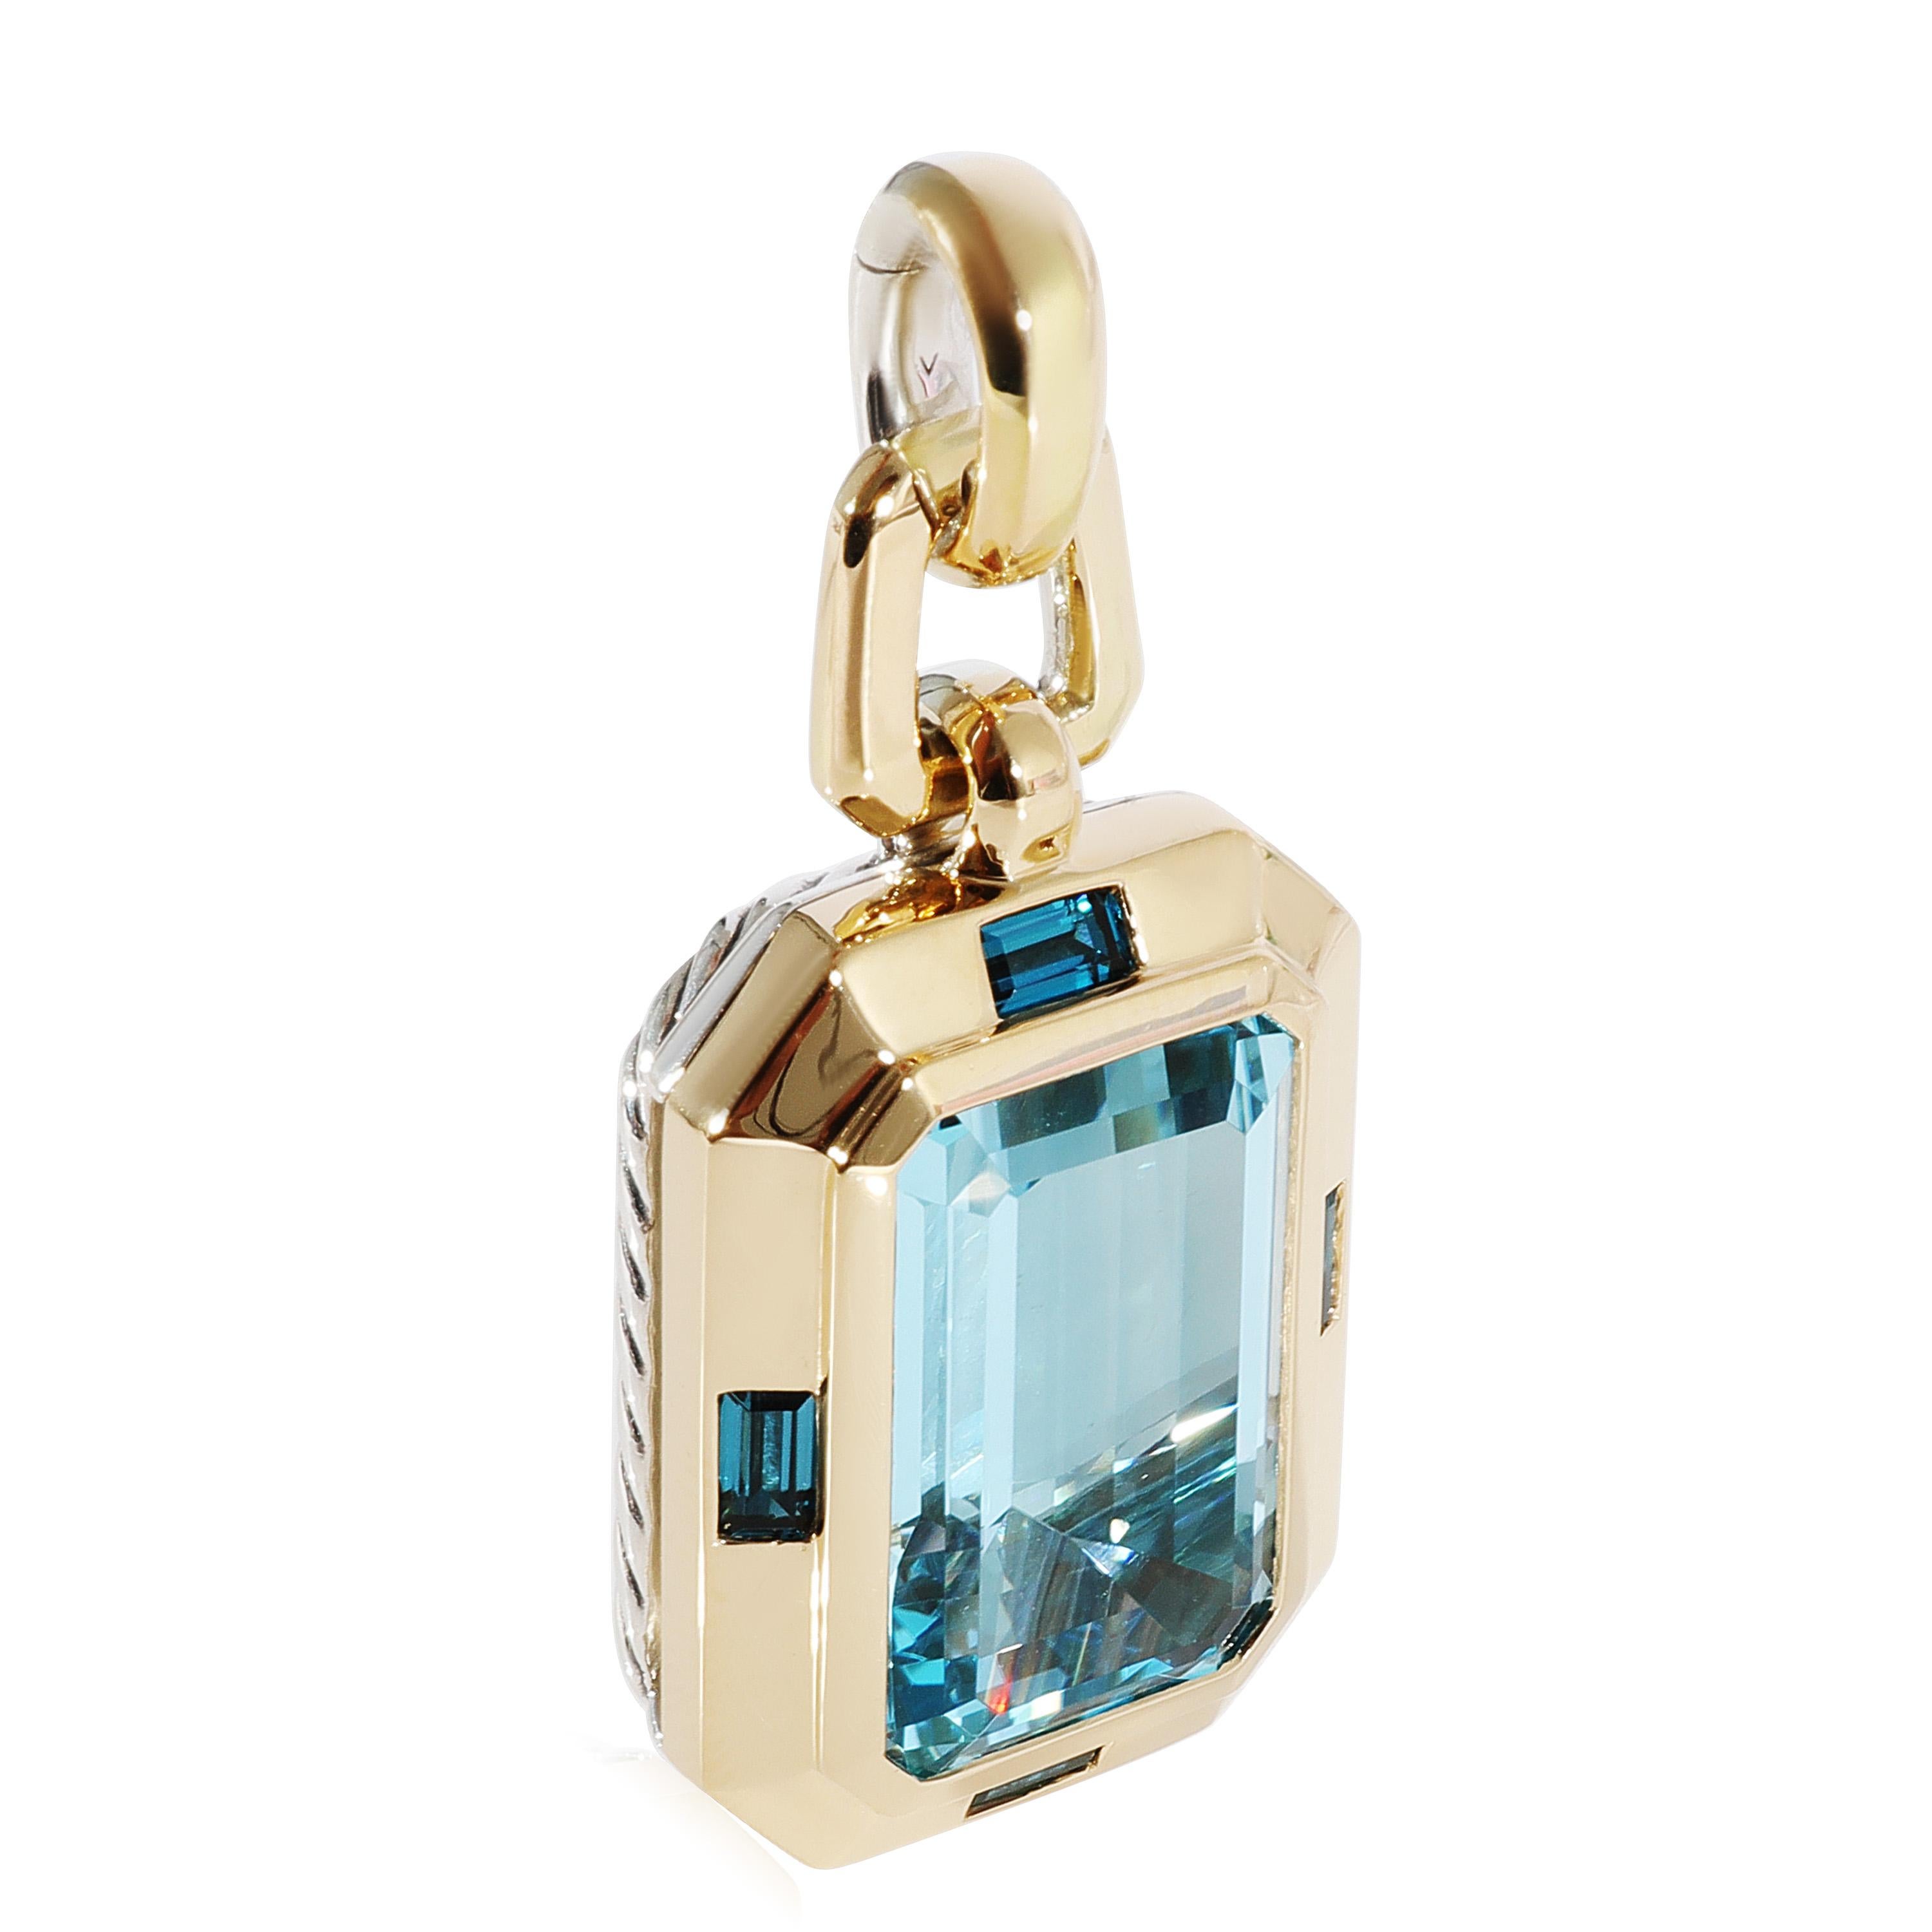 David Yurman Novella Blue Topaz  Pendant in 18K Yellow Gold/SS

PRIMARY DETAILS
SKU: 125017
Listing Title: David Yurman Novella Blue Topaz  Pendant in 18K Yellow Gold/SS
Condition Description: Retails for 2900 USD. In excellent condition and